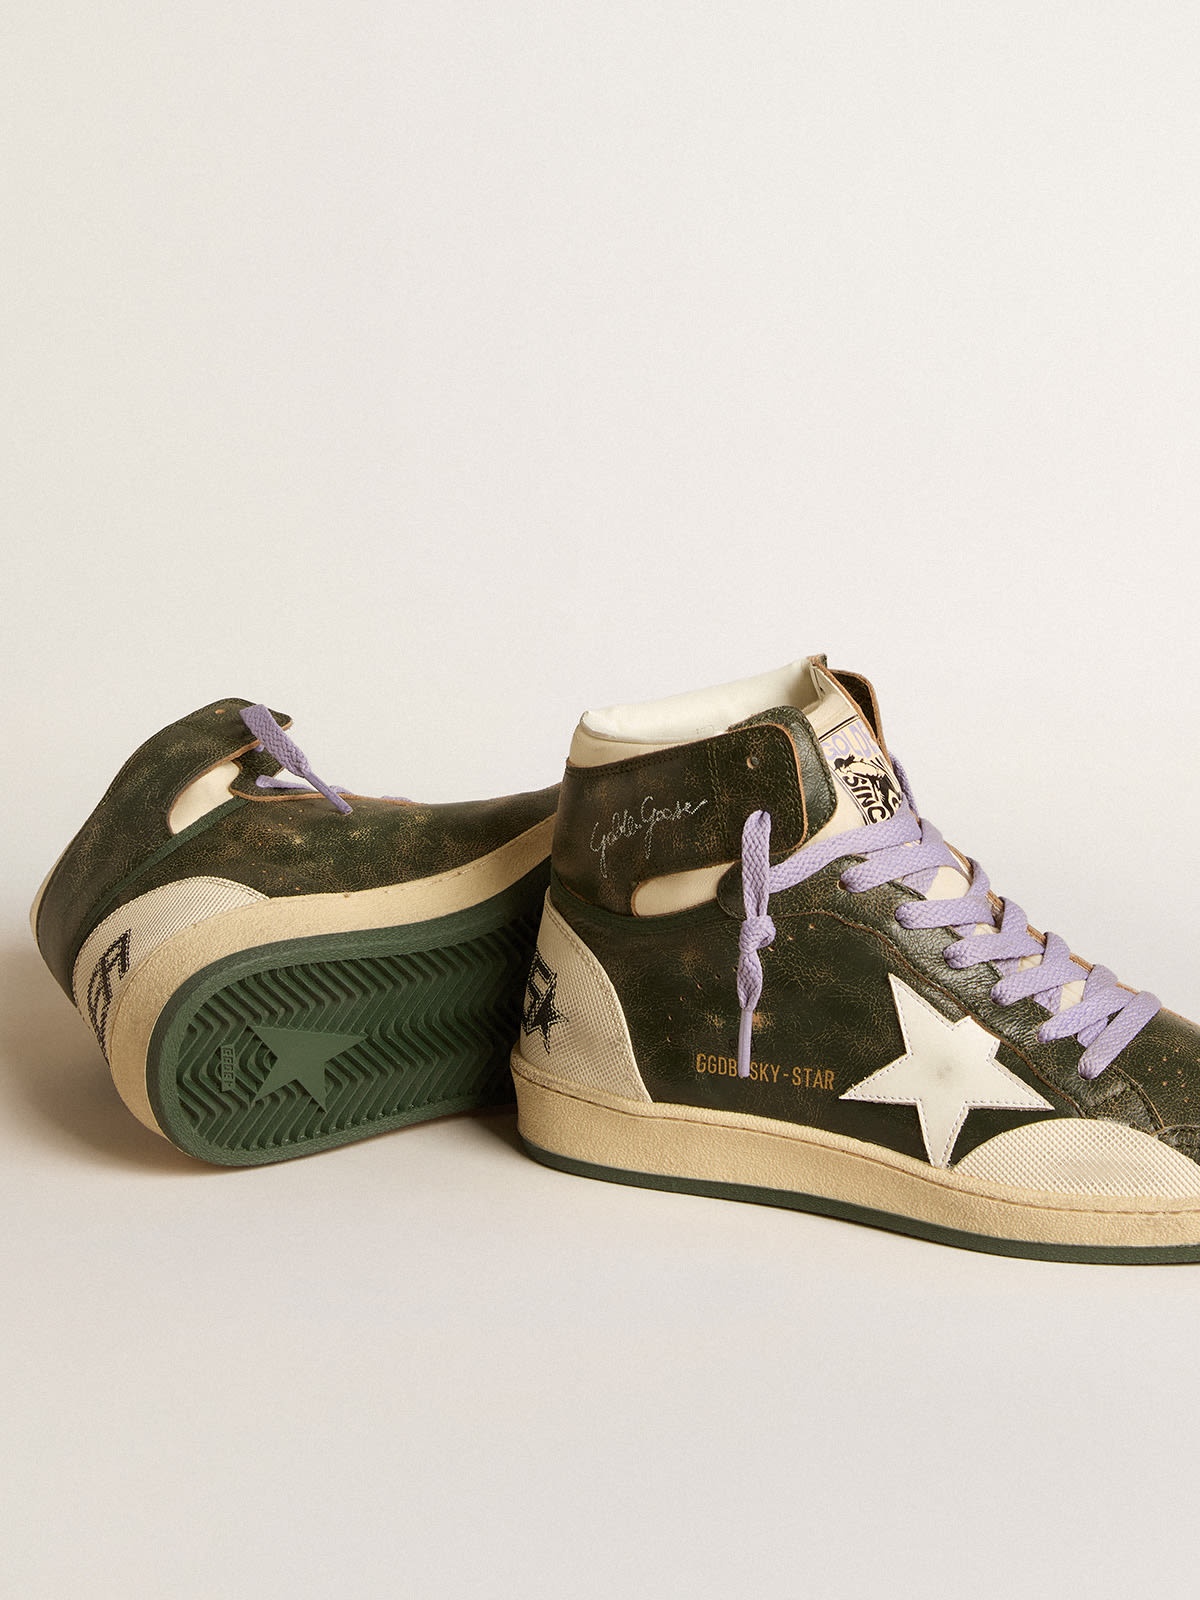 Women's Sky-Star Pro in green leather with white star - 3